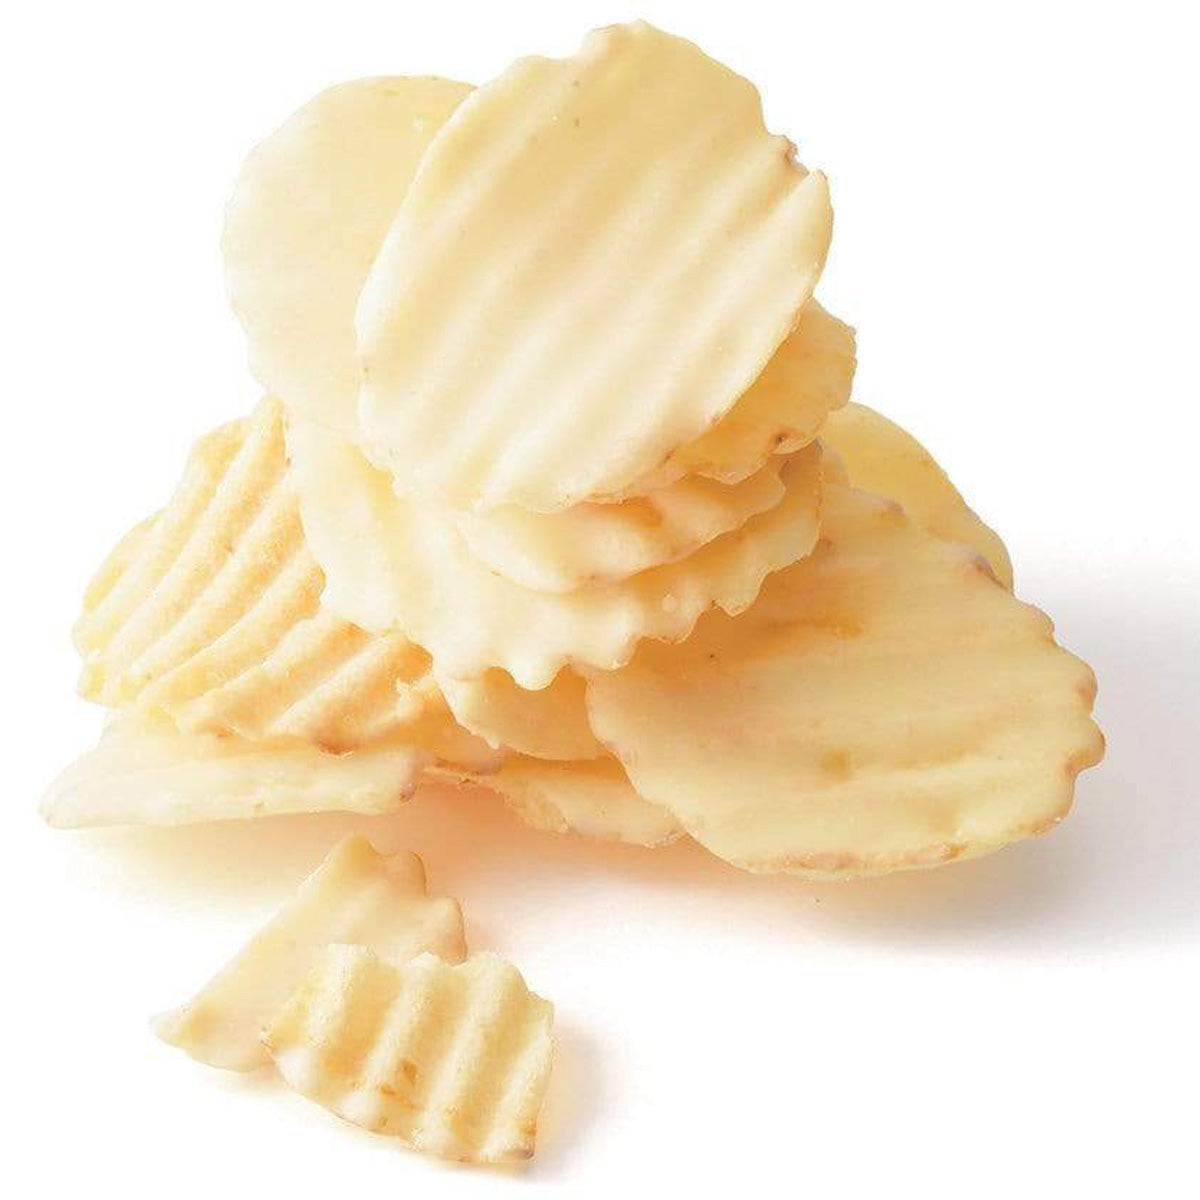 ROYCE' Chocolate - Potatochip Chocolate "Fromage Blanc" - Image shows white chocolate-coated potato chips with a ridged texture. Background is white.